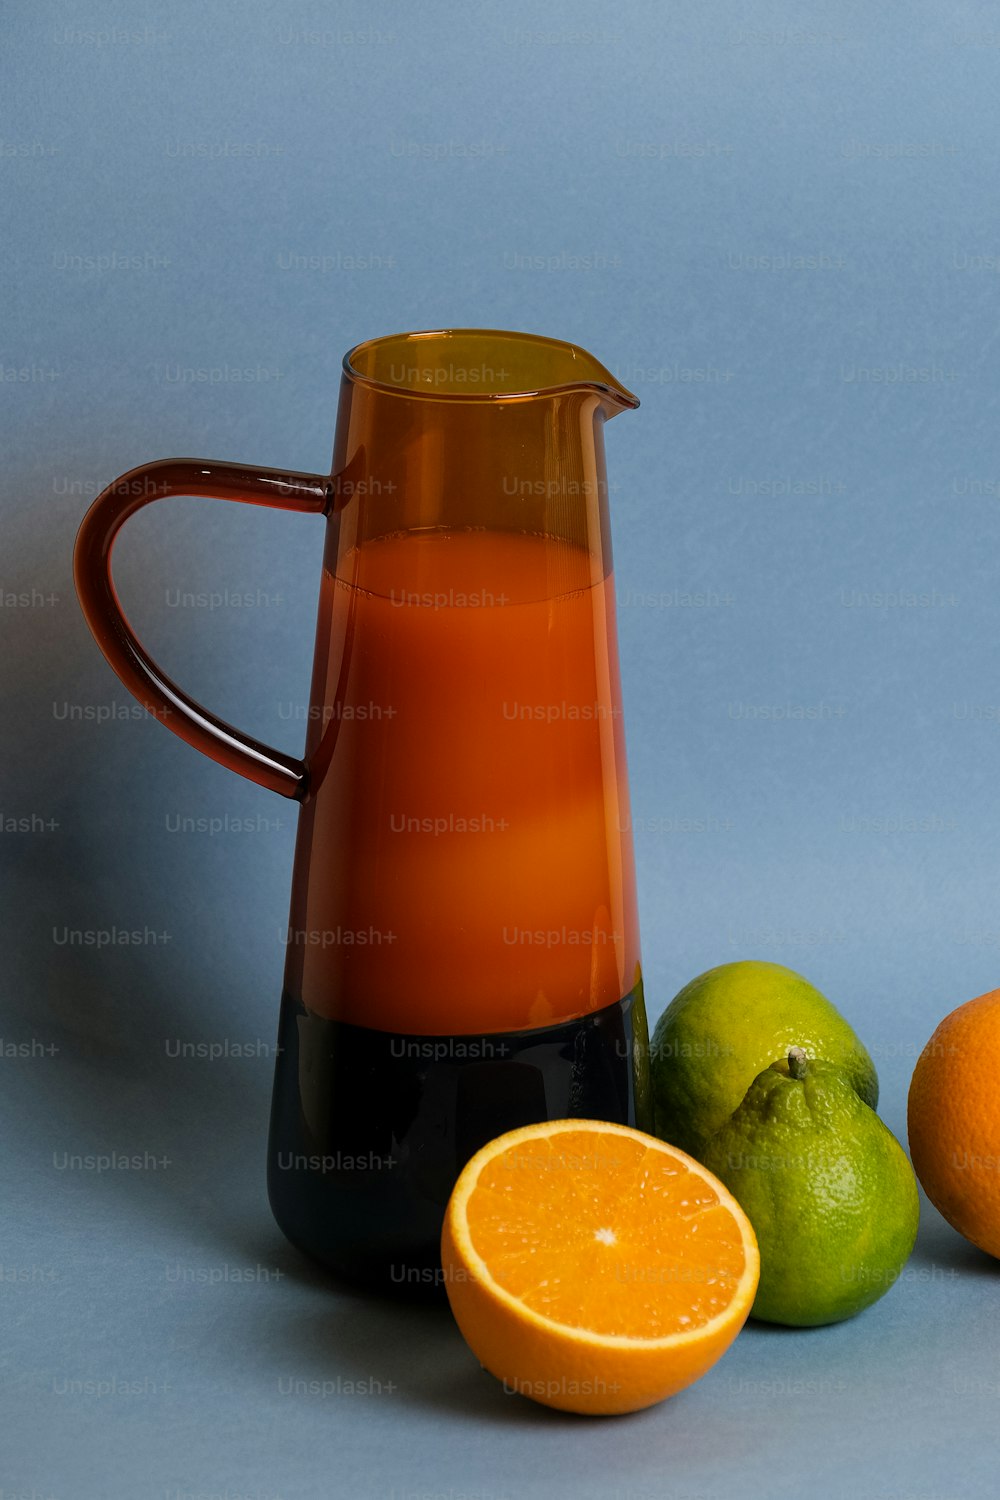 a pitcher of orange juice next to two limes and an orange